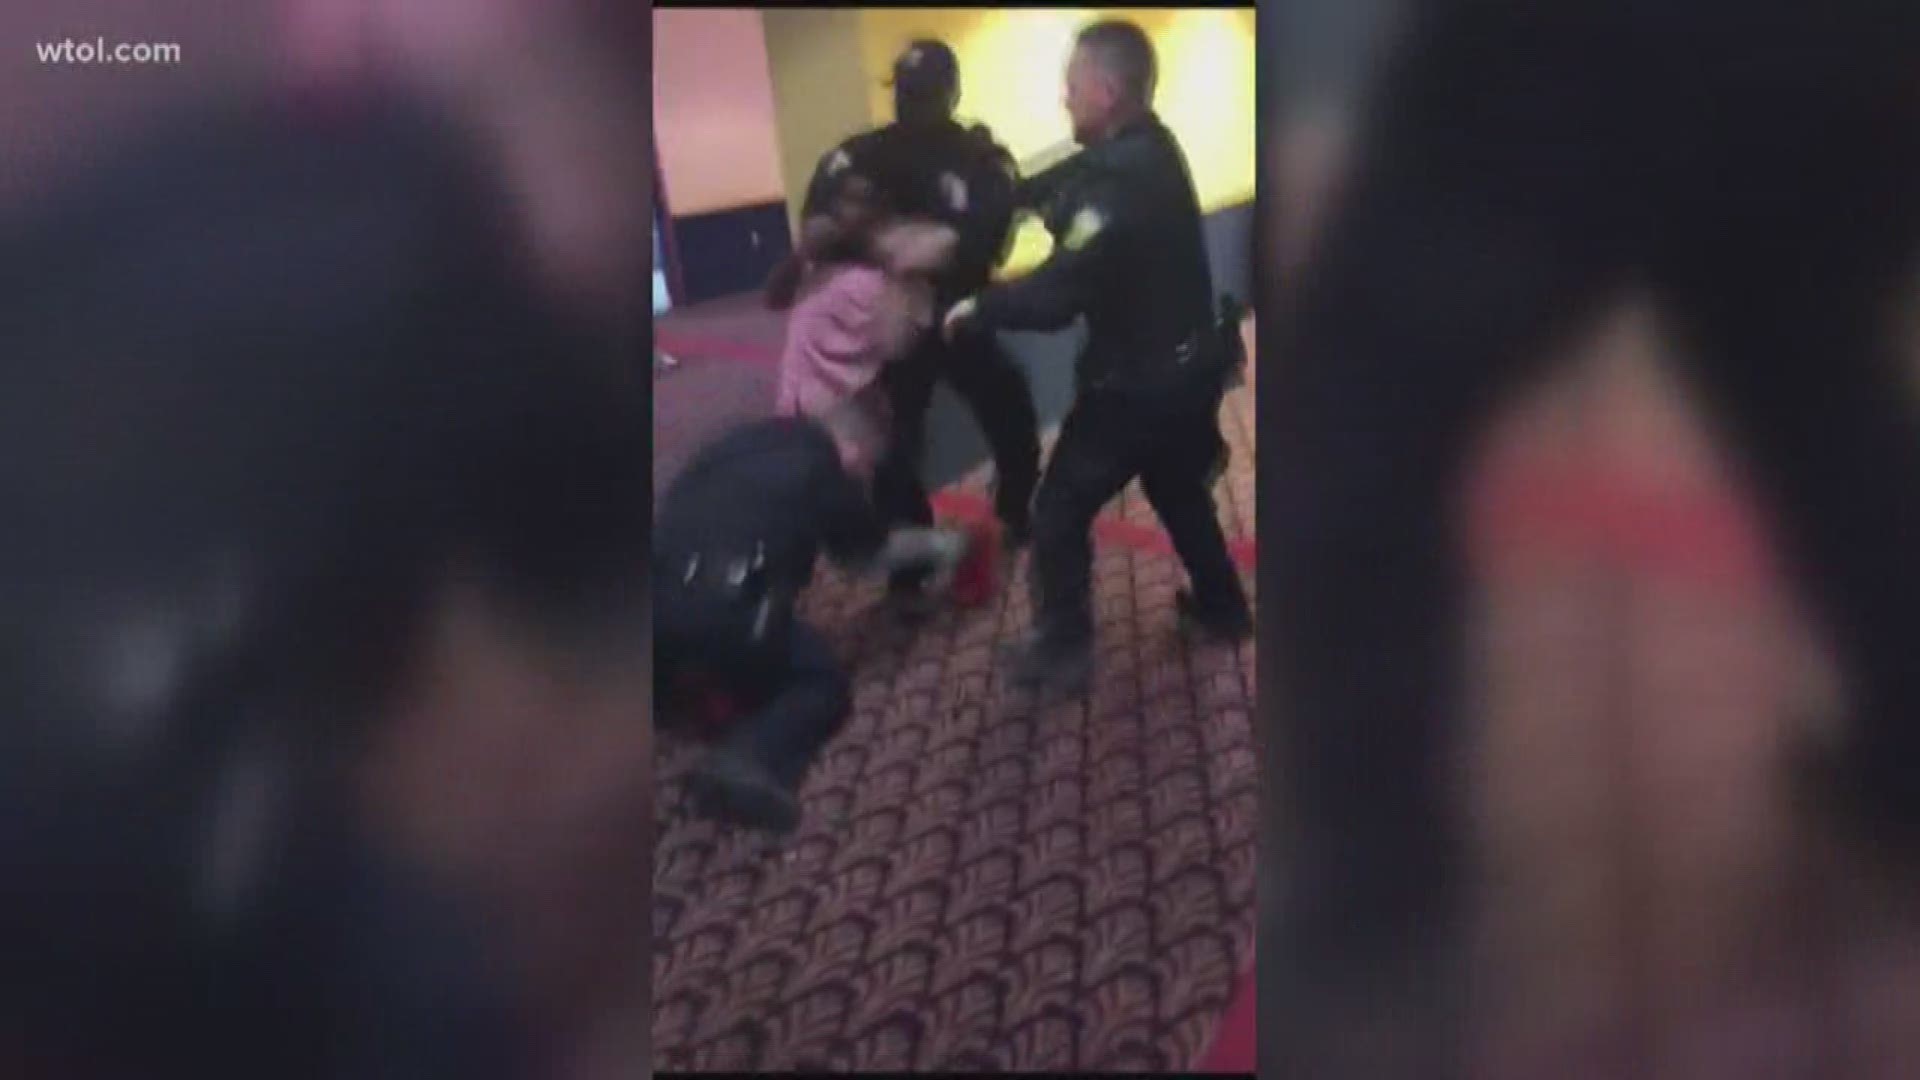 The brawl has been viewed more than 70,000-Facebook after locals recorded what was happening on Snapchat.